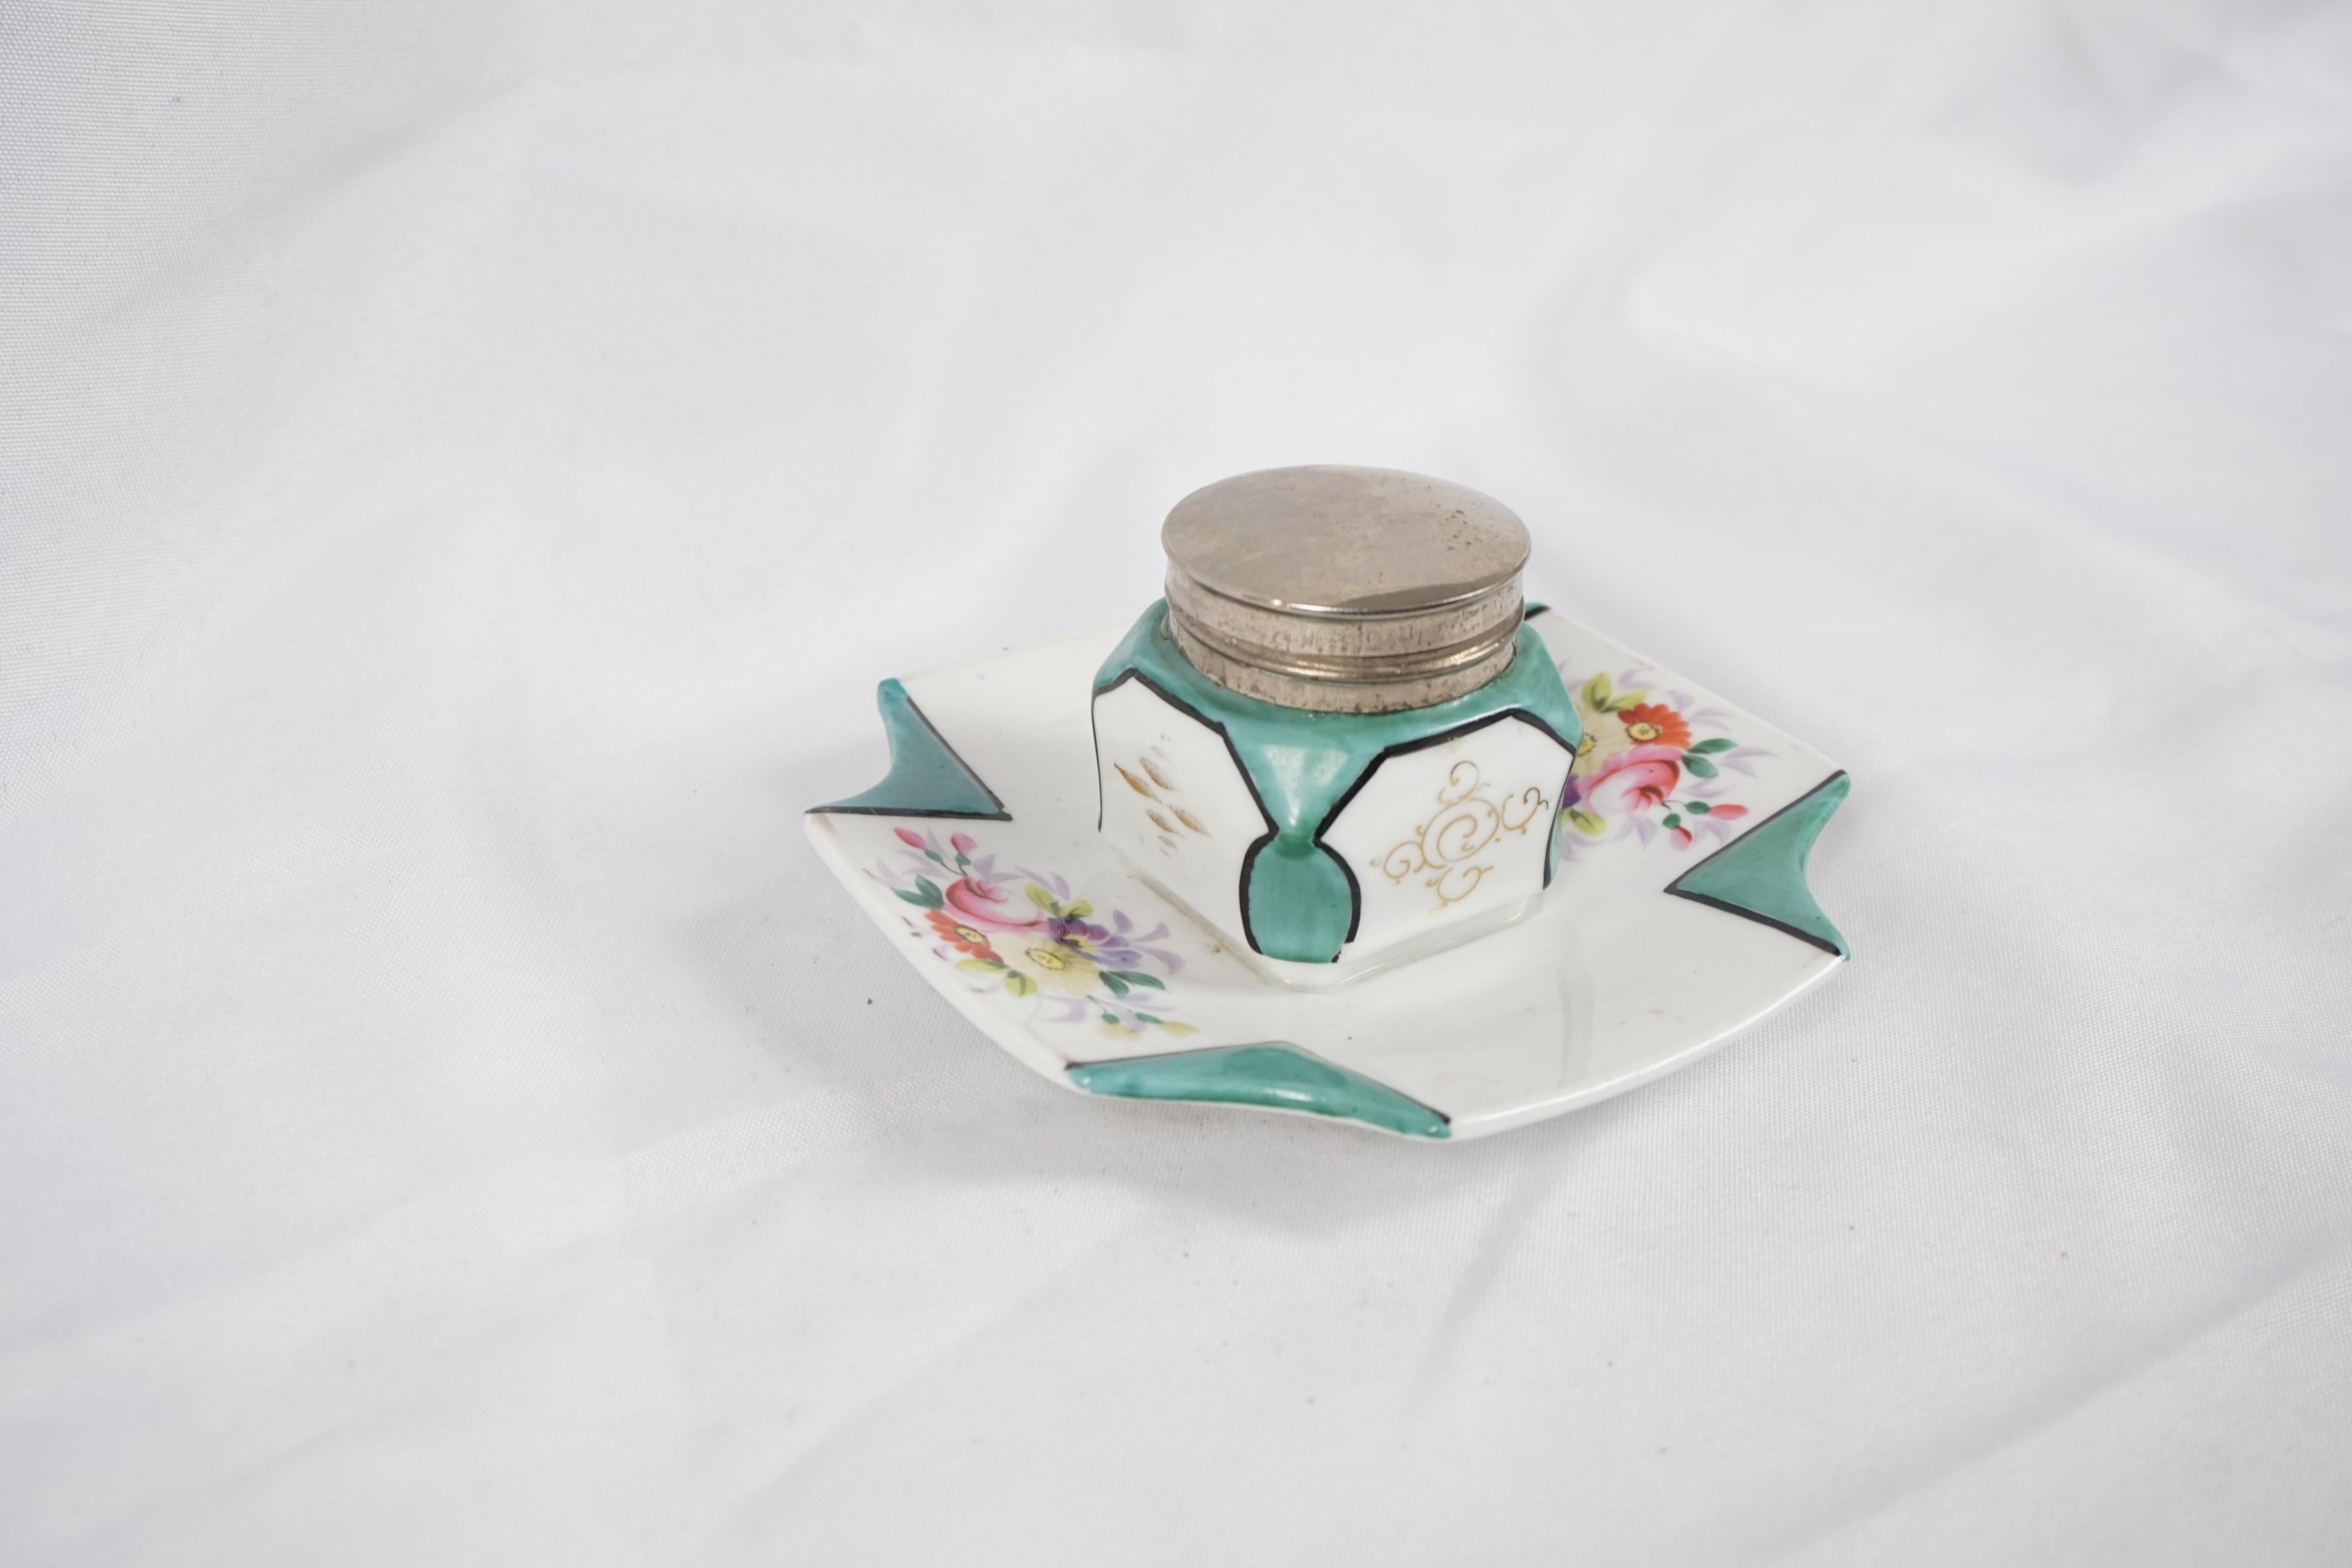 Vintage porcelain inkwell, hand painted, Scotland 1930, B2824

Scotland 1930
Fine China
Hand painted inkwell with hinged top
Sitting in center of cruciform base with hand painted flower
Please note porcelain liner has a couple of cracks but